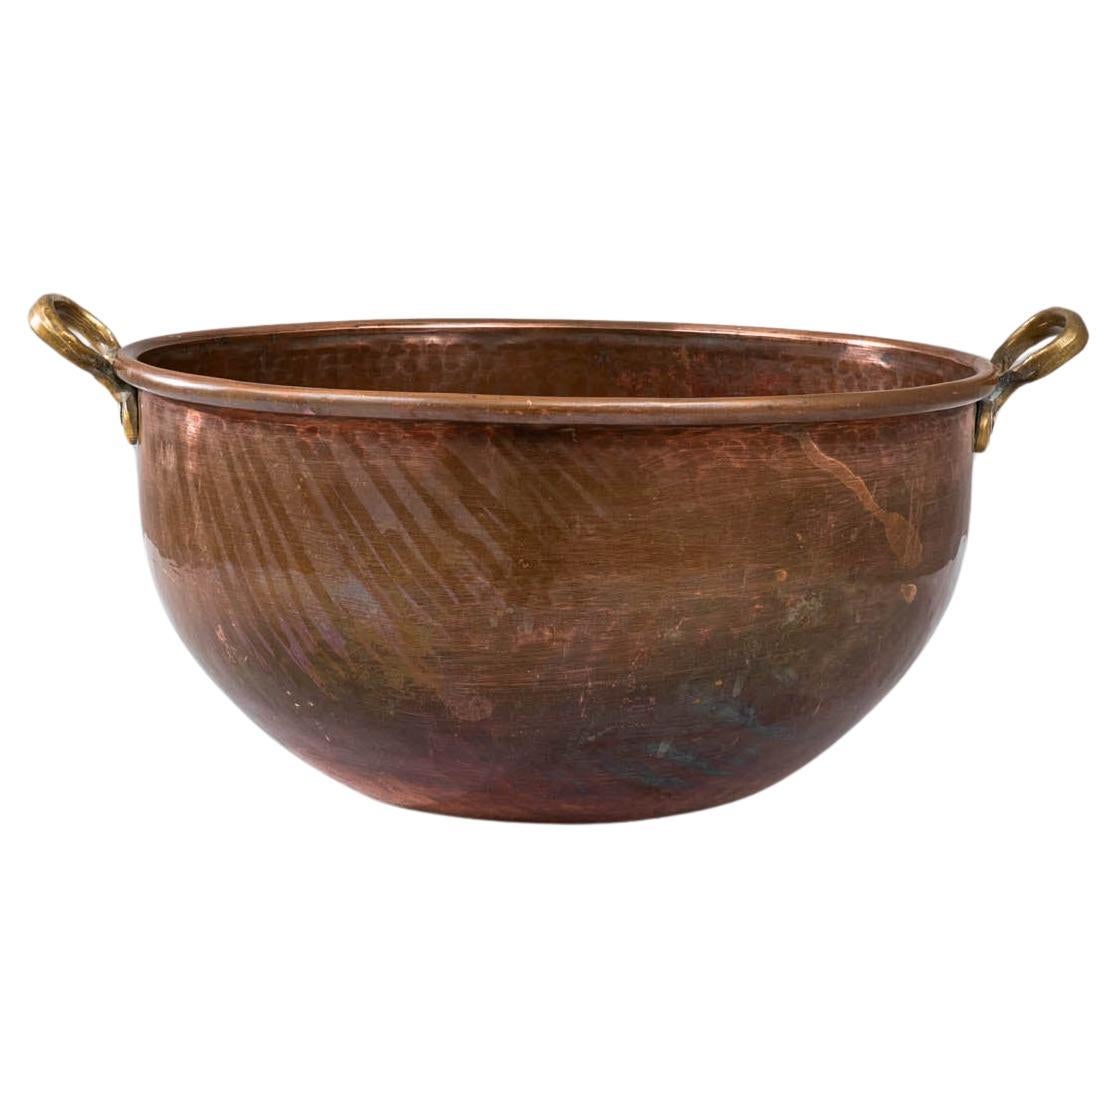 Early 19th Century Copper Pot